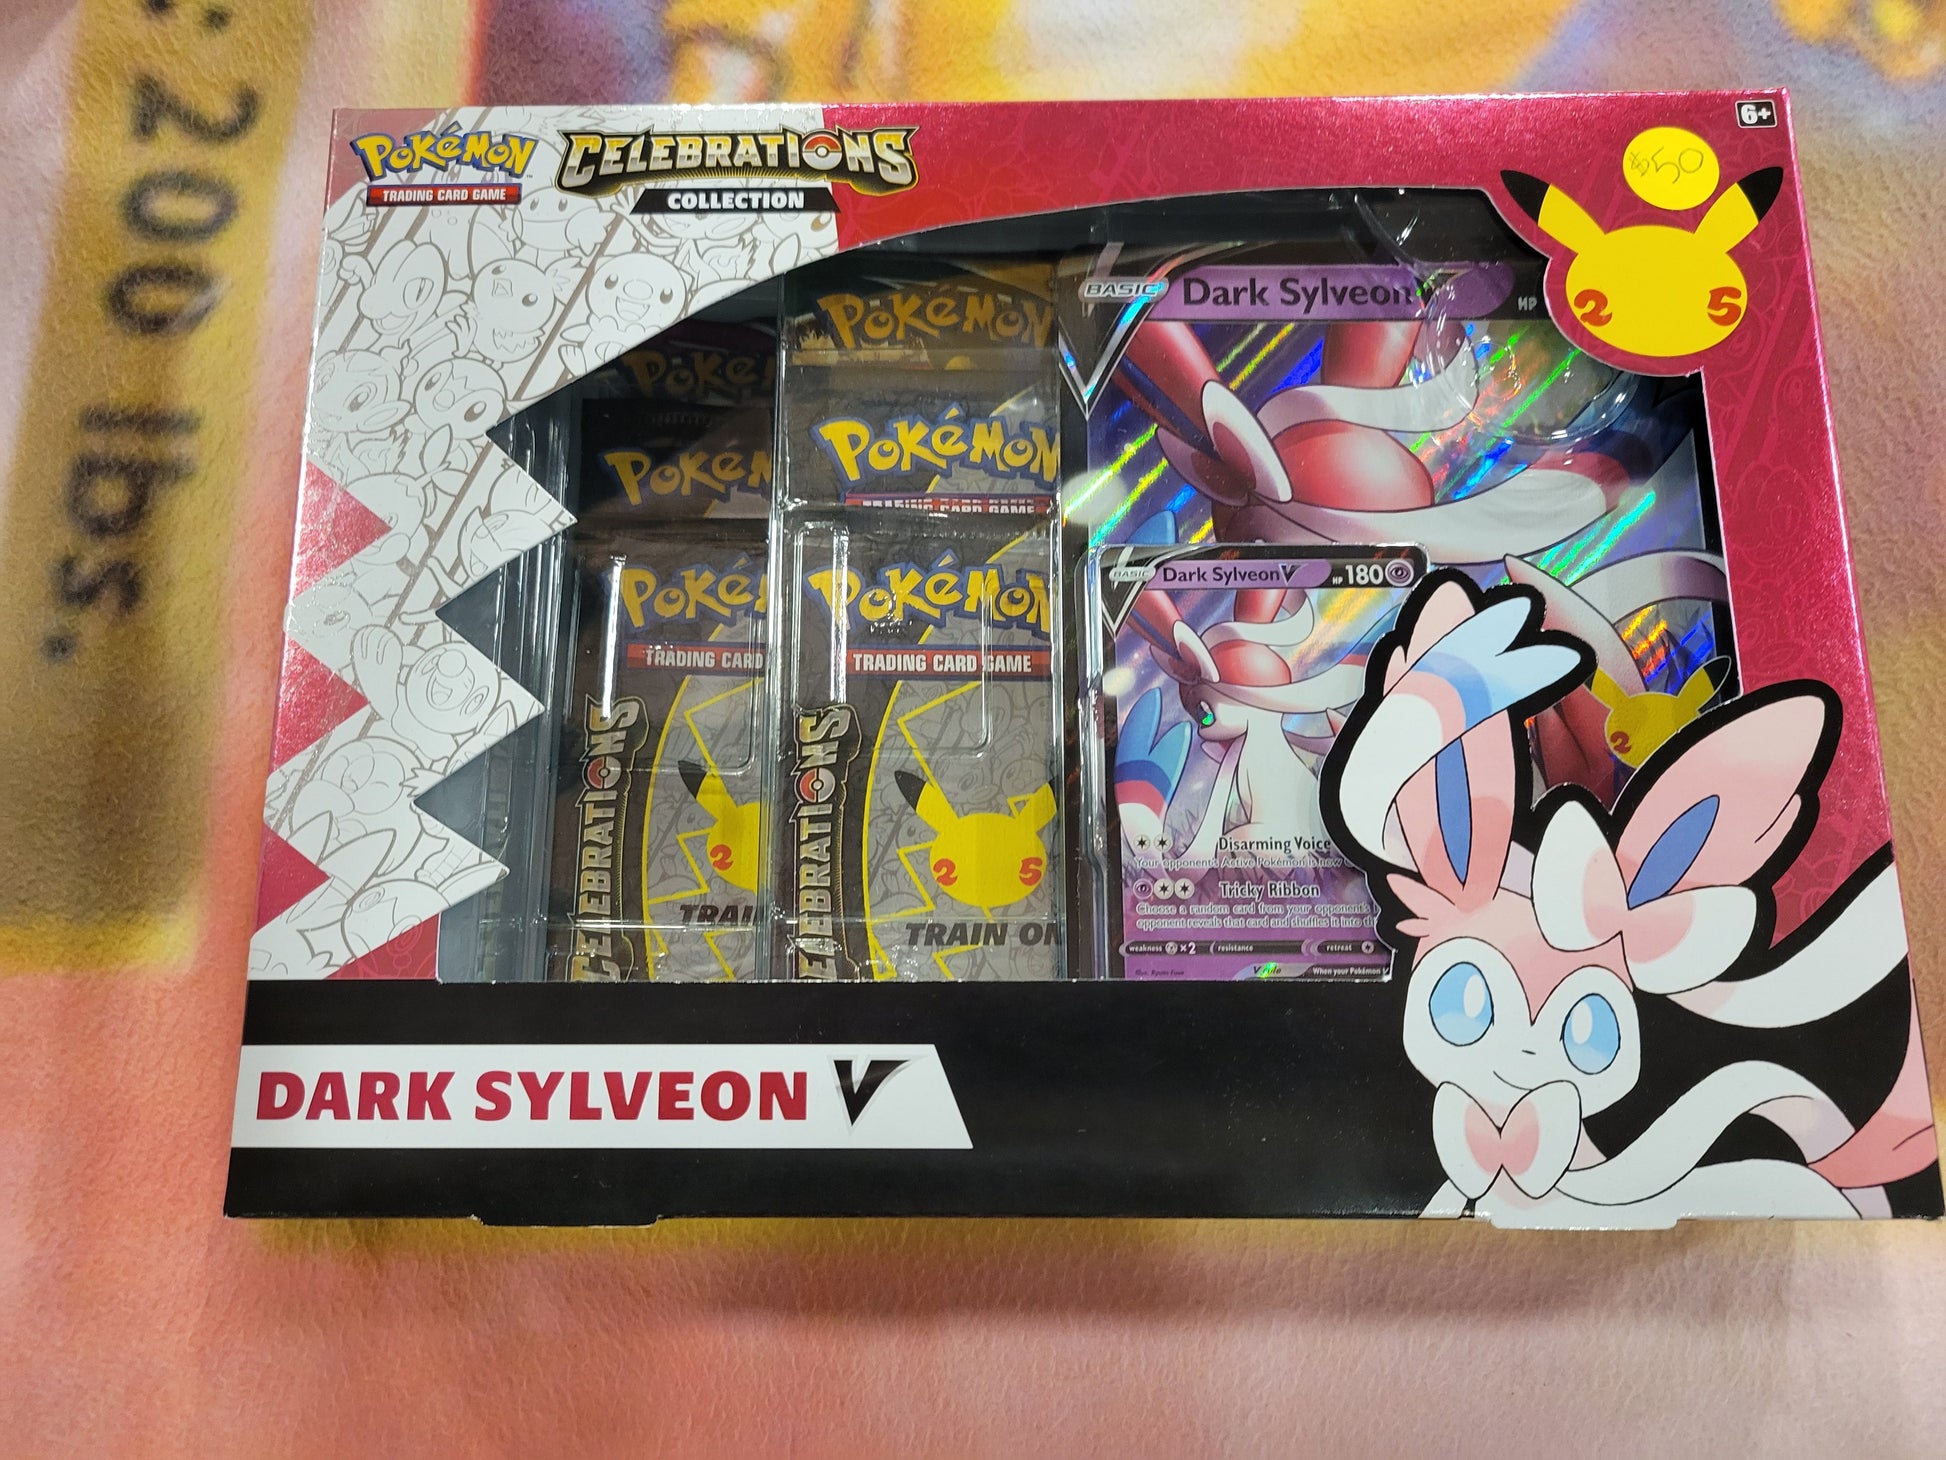 Each Dark Sylveon box comes with one oversized Dark Sylveon card, one Celebrations Dark Sylveon card, one online code card, two tcg packs, and four Celebrations packs.